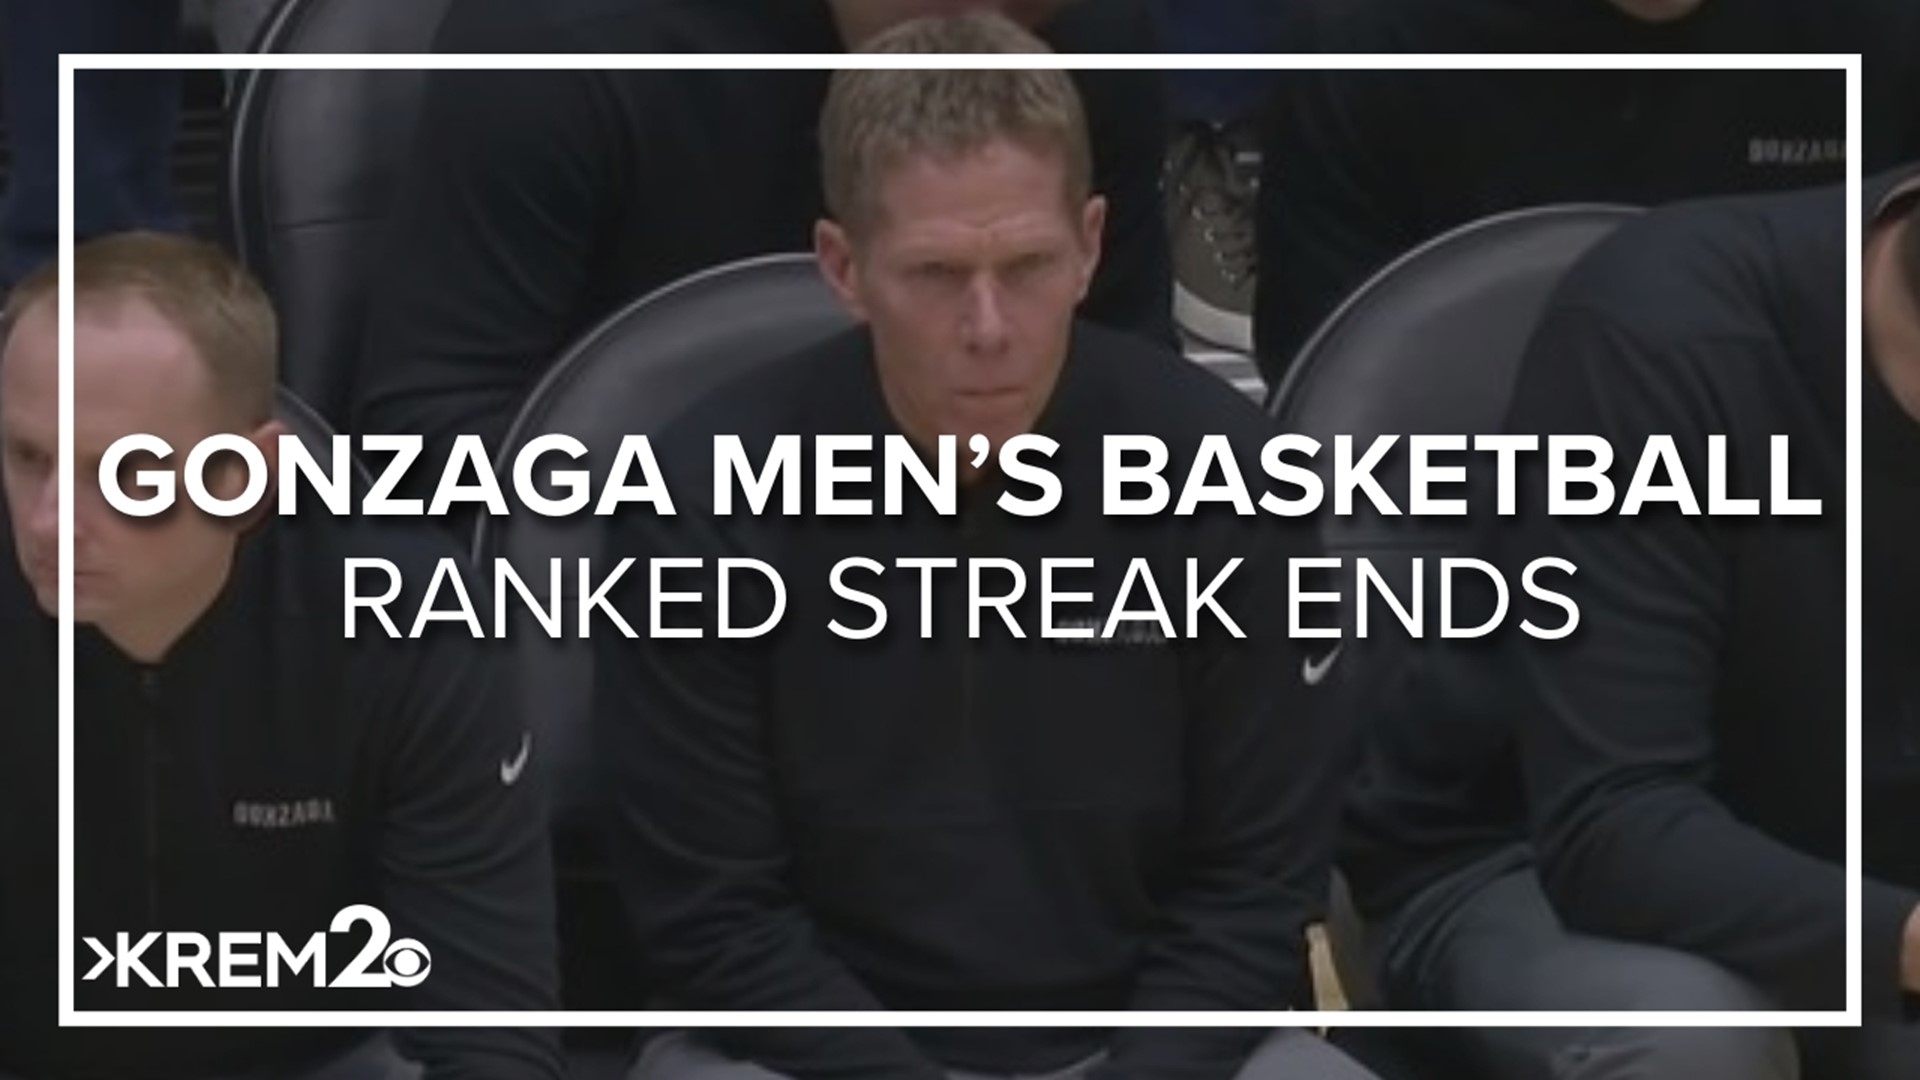 The Zags are unranked for the first time since March 14, 2016.